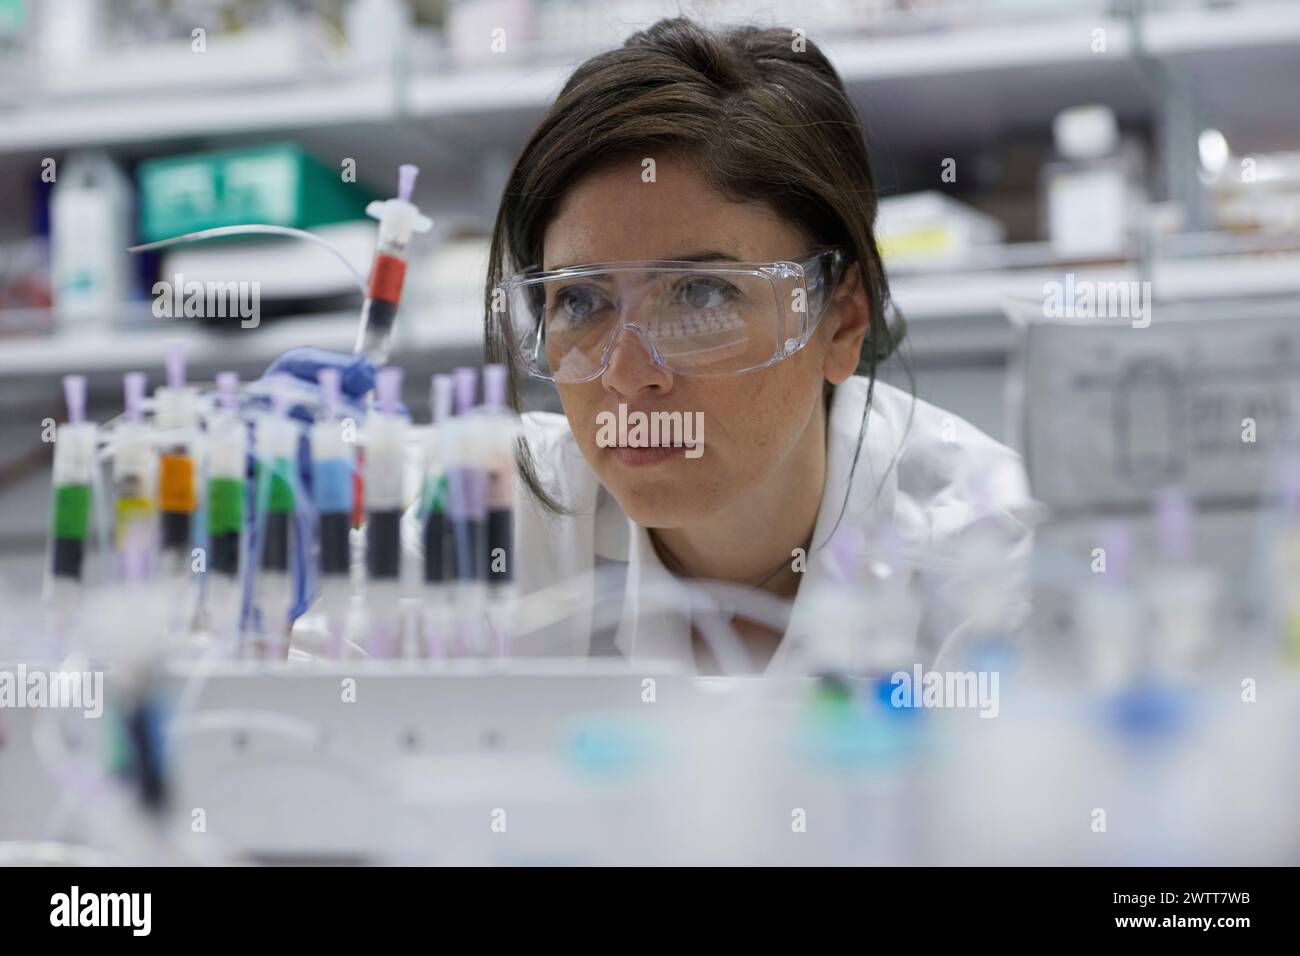 Attractive female scientist examinine test tube for results Stock Photo